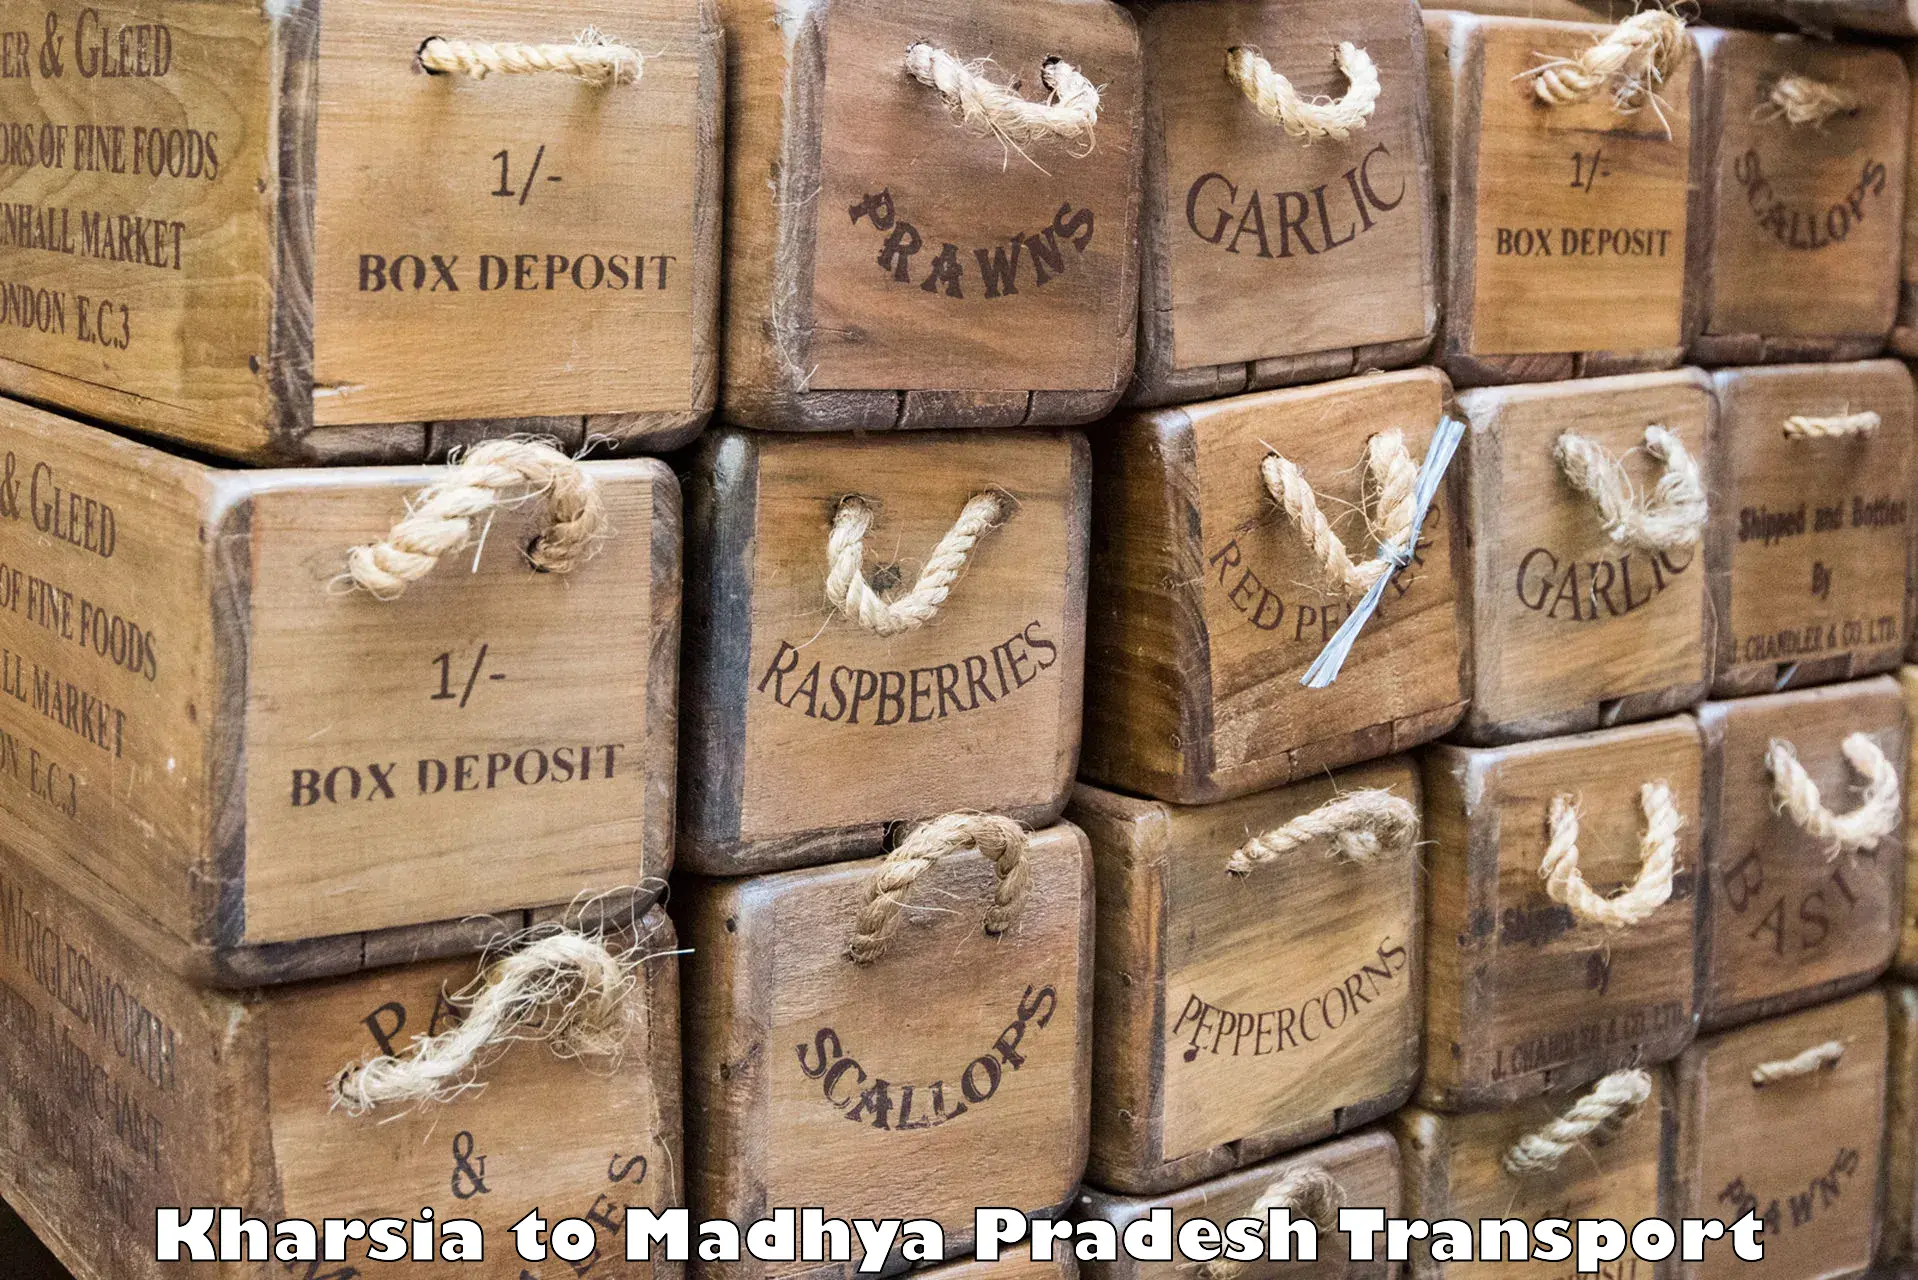 Express transport services in Kharsia to Mandla